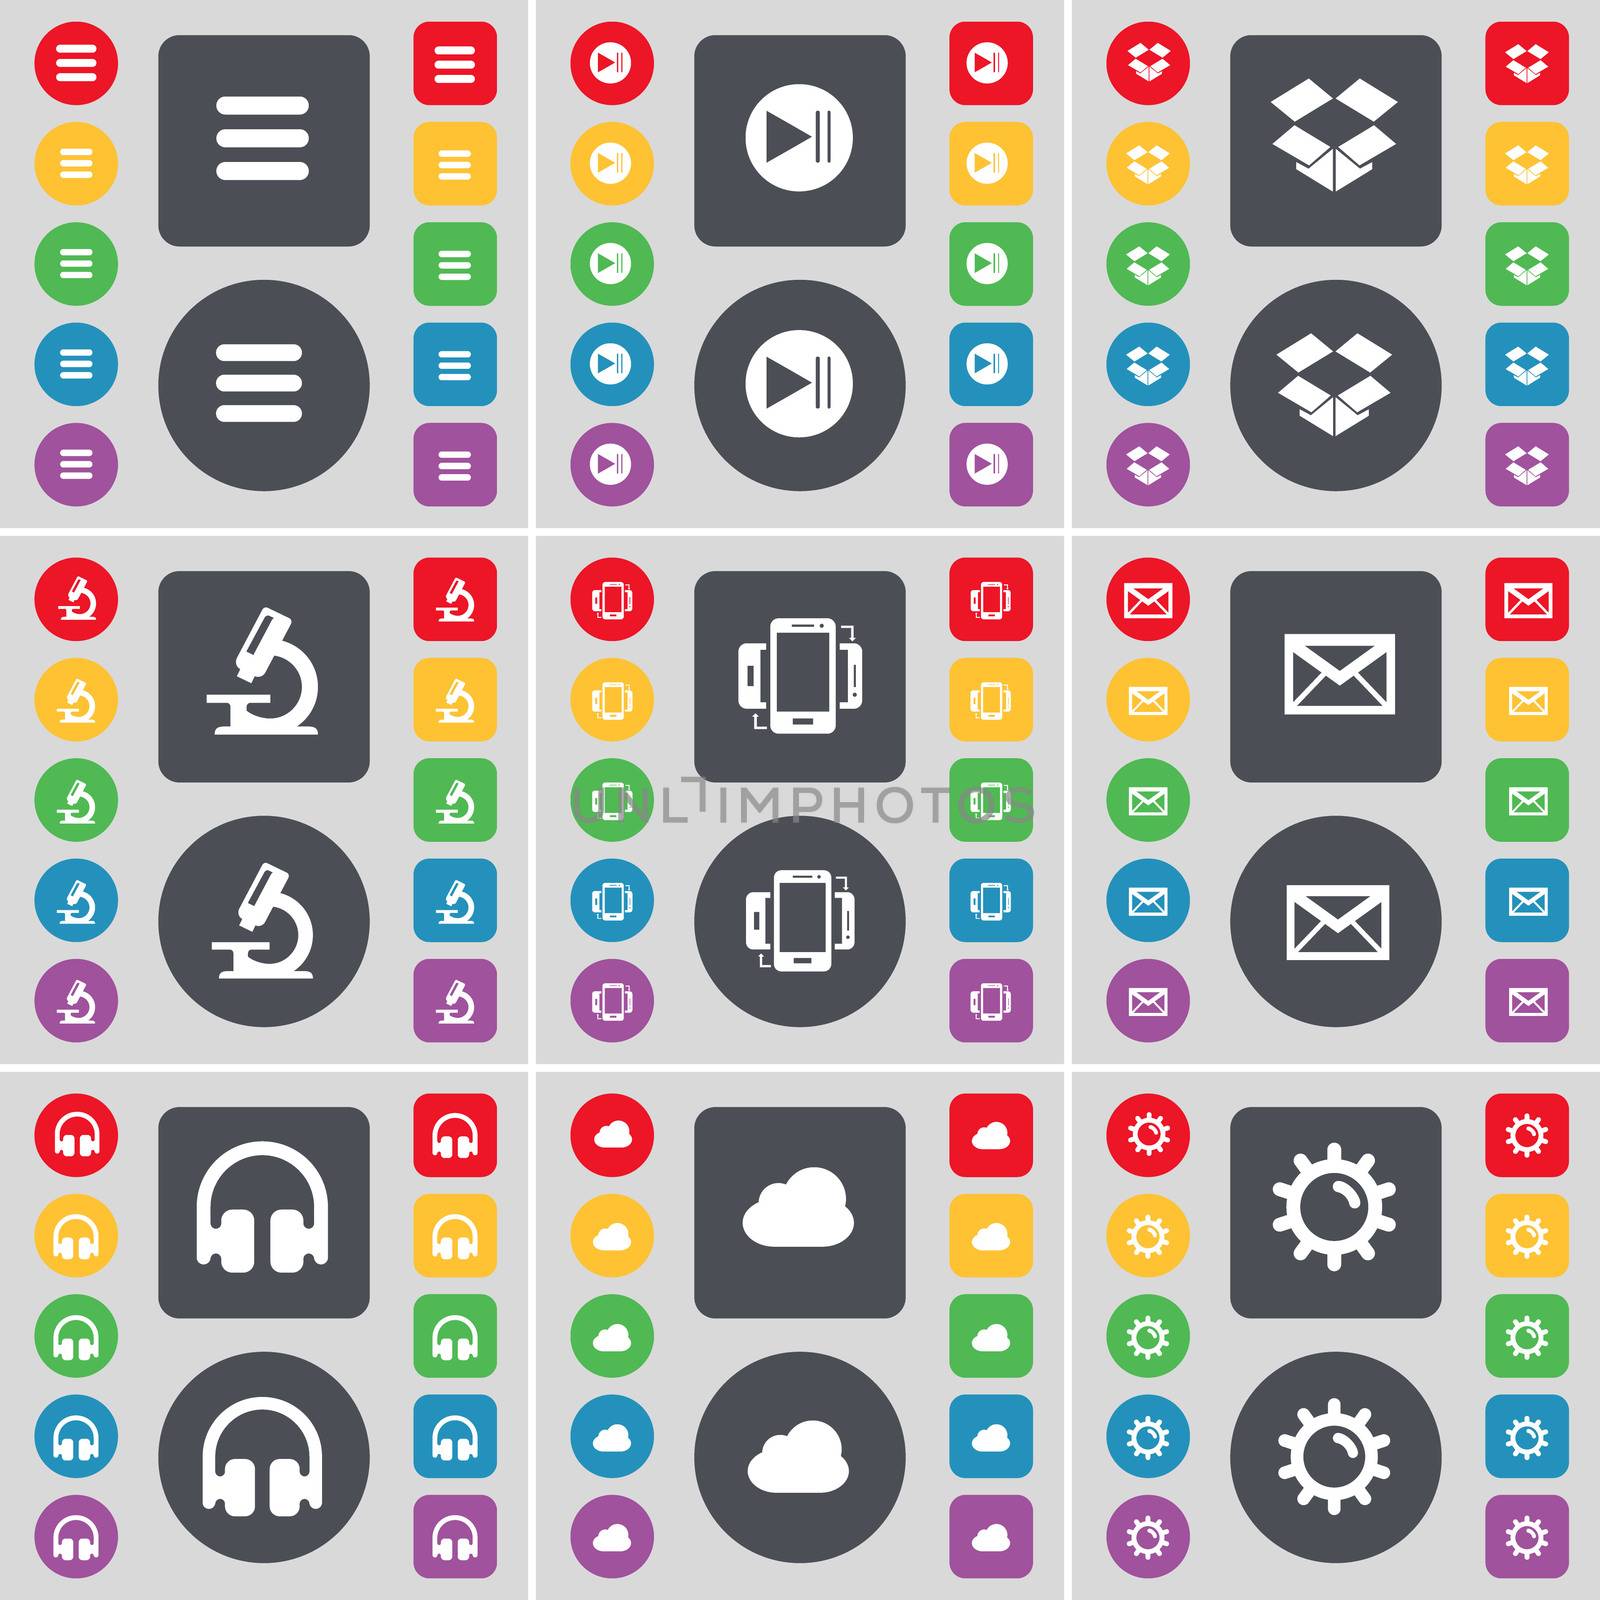 Apps, Media skip, Dropbox, Microscope, Smartphone, Message, Headphones, Cloud, Gear icon symbol. A large set of flat, colored buttons for your design. illustration